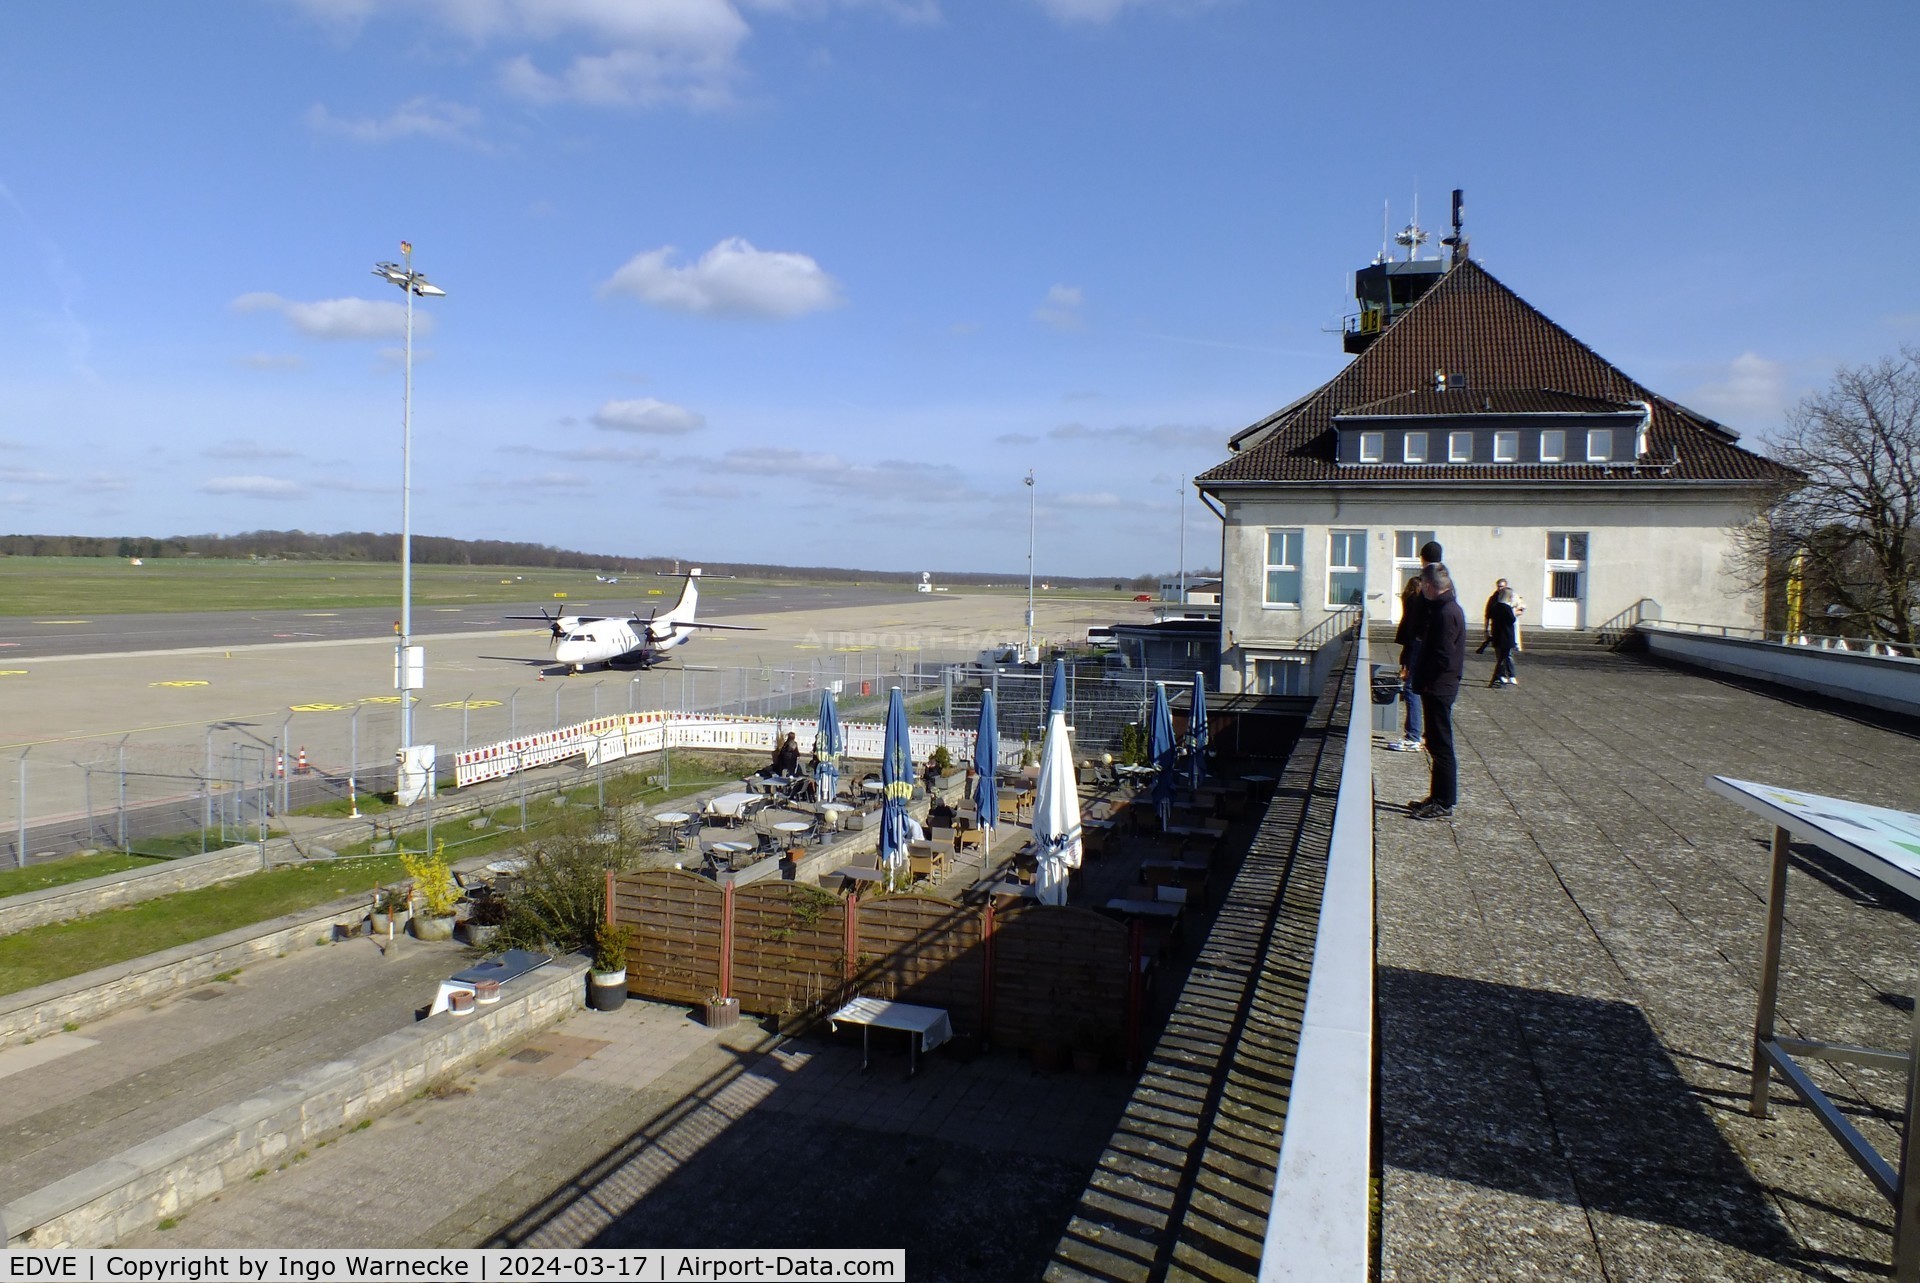 Braunschweig-Wolfsburg Regional Airport, Braunschweig, Lower Saxony Germany (EDVE) - looking east at apron, airport restaurant and terminal from the visitors terrace of Braunschweig/Wolfsburg airport, BS/Waggum